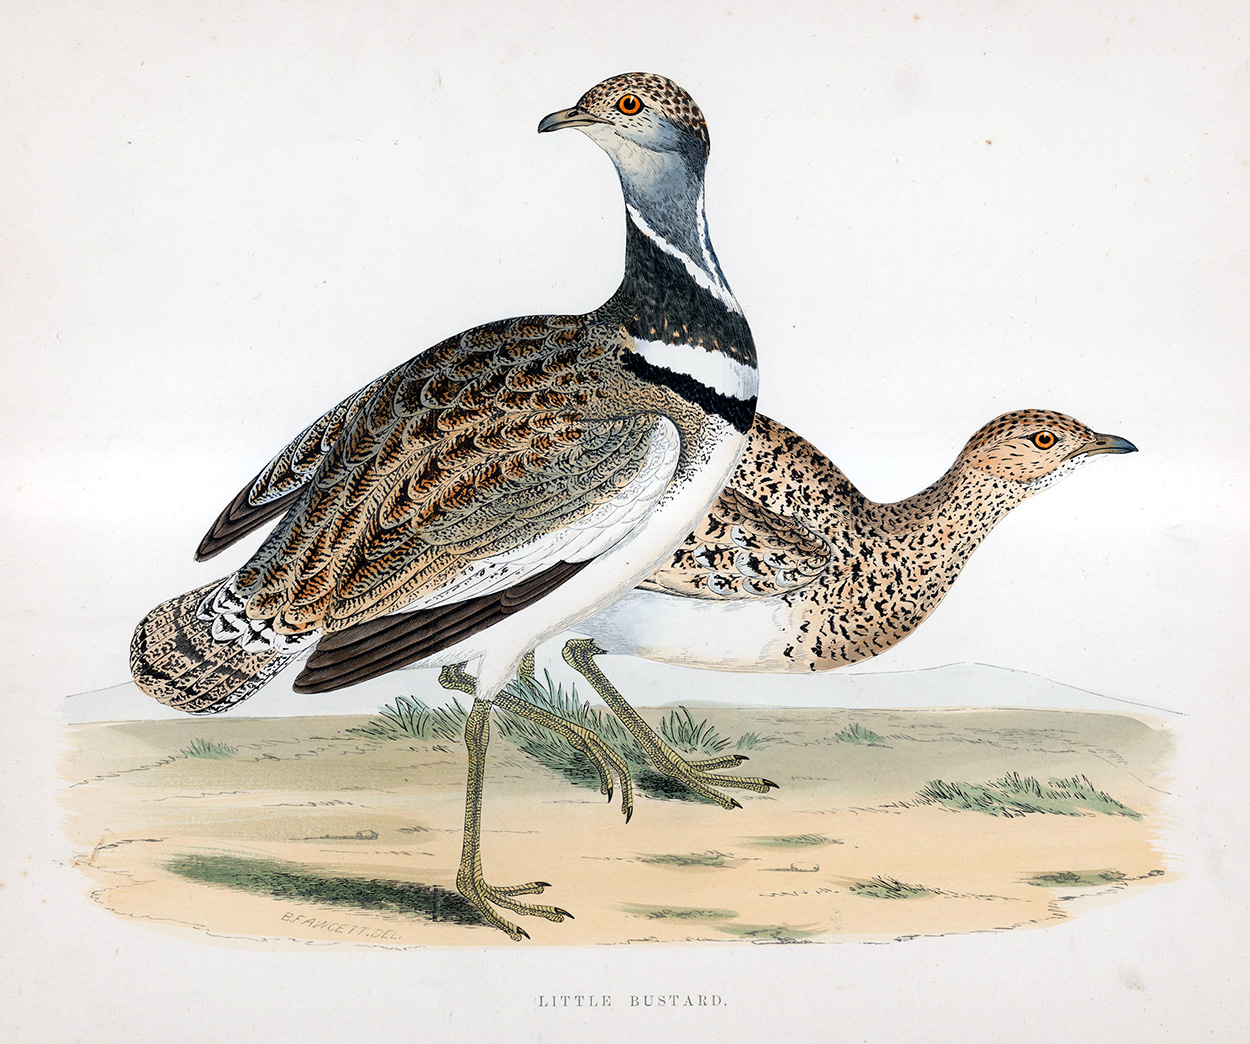 Little Bustard - hand coloured lithograph 1891 (Print) art by Beverley R Morris Art at The Illustration Art Gallery